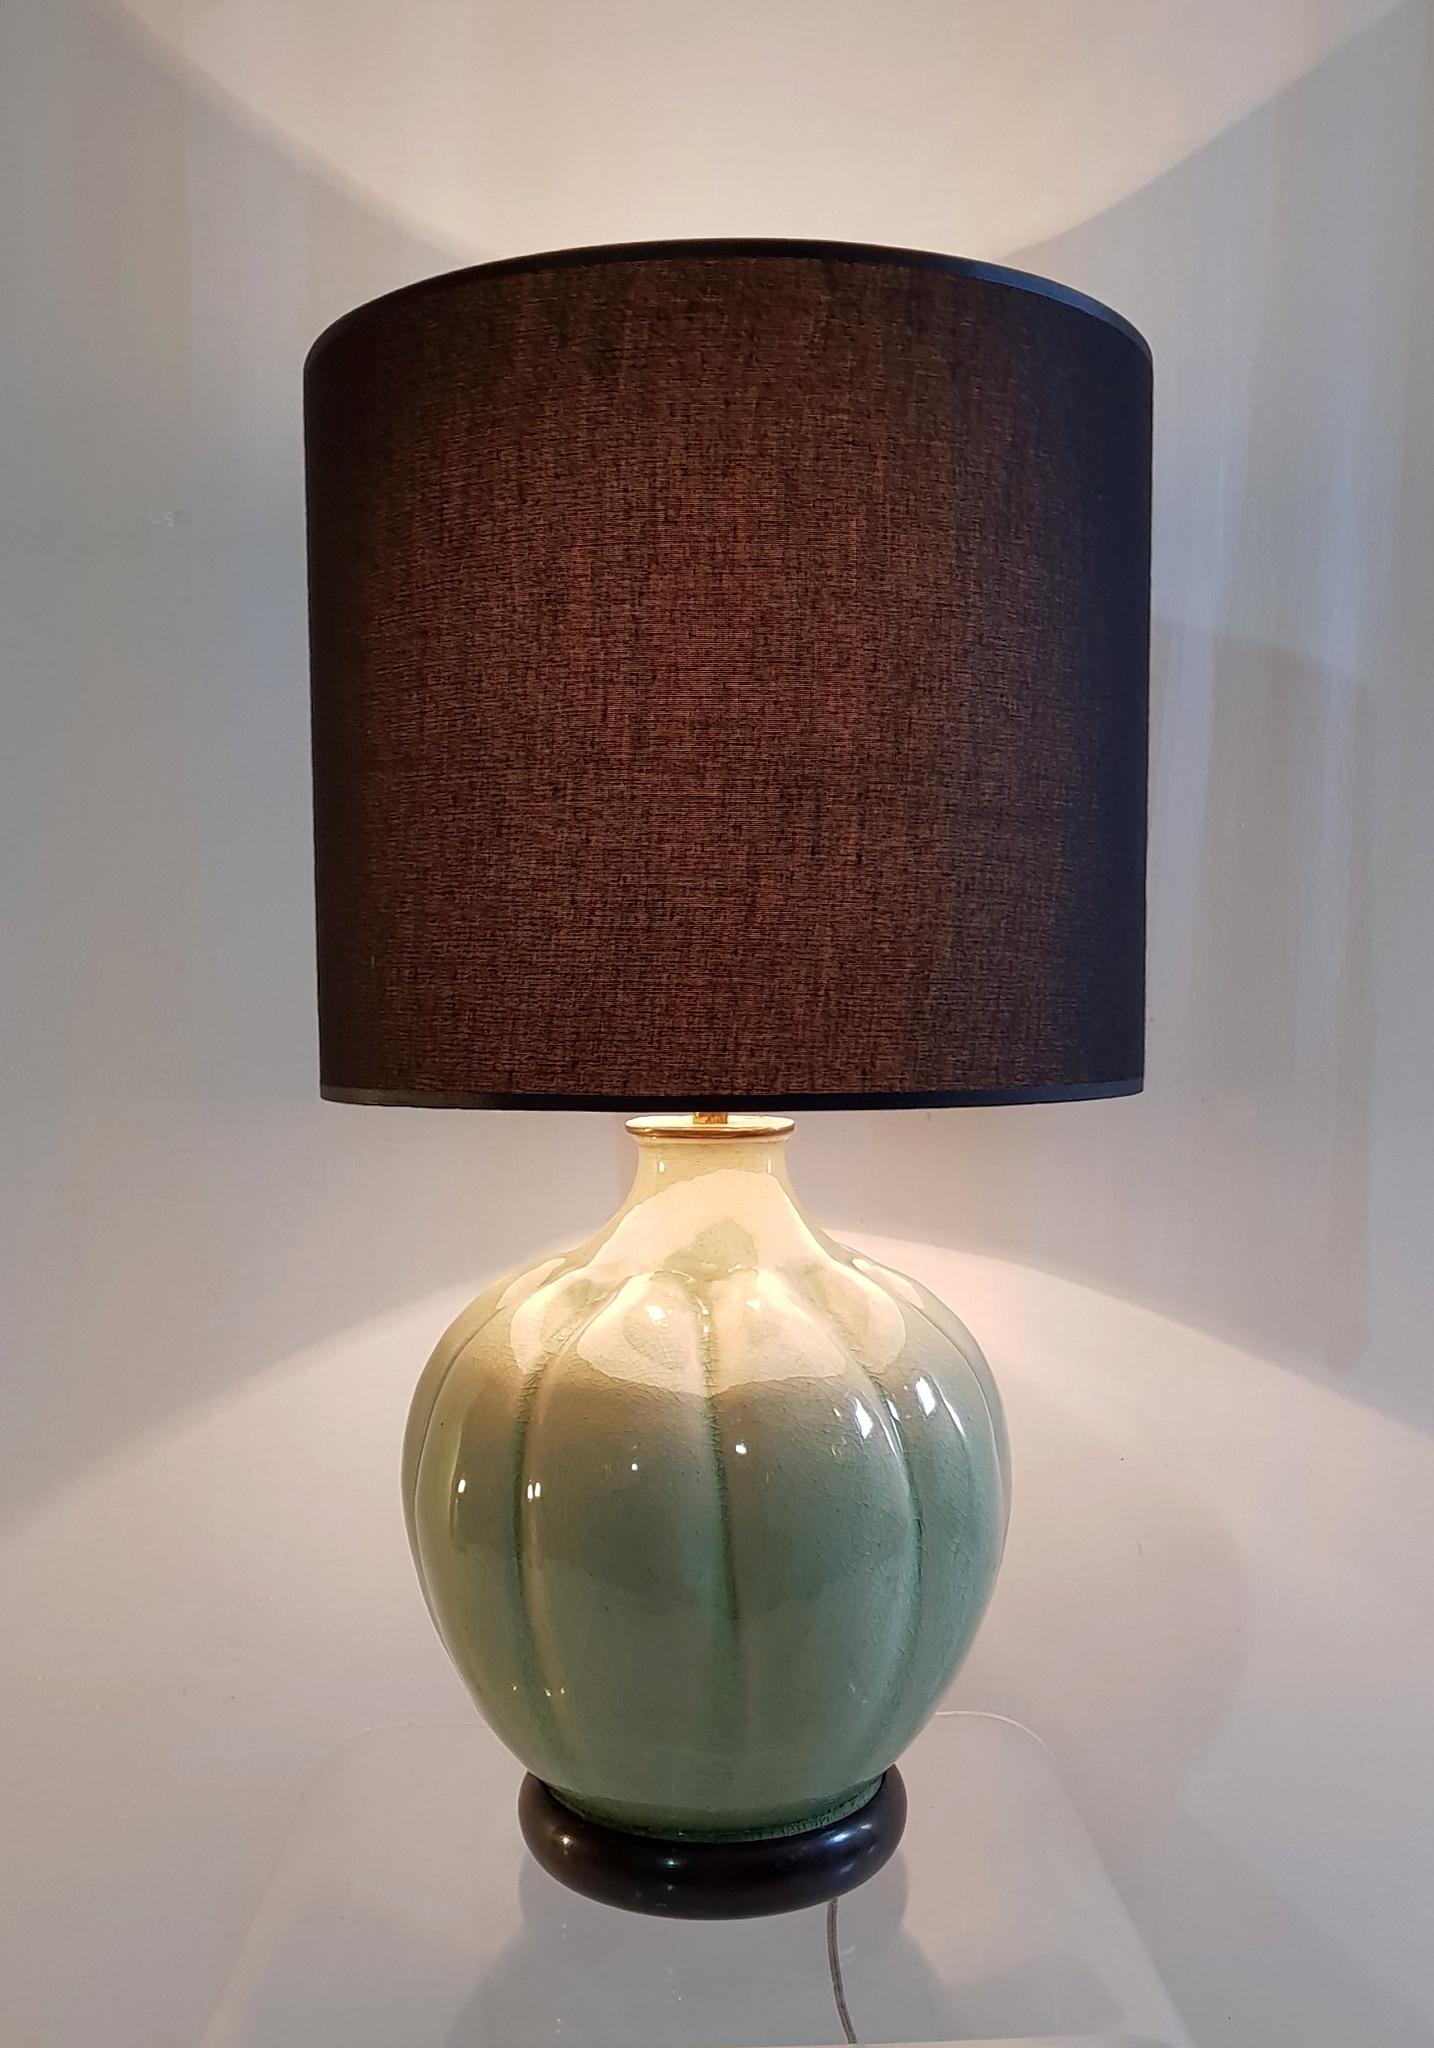 Table lamp in celadon green glazed porcelain with an organic pumpkin shape and a brass stem to hold the brand new lampshade in black.